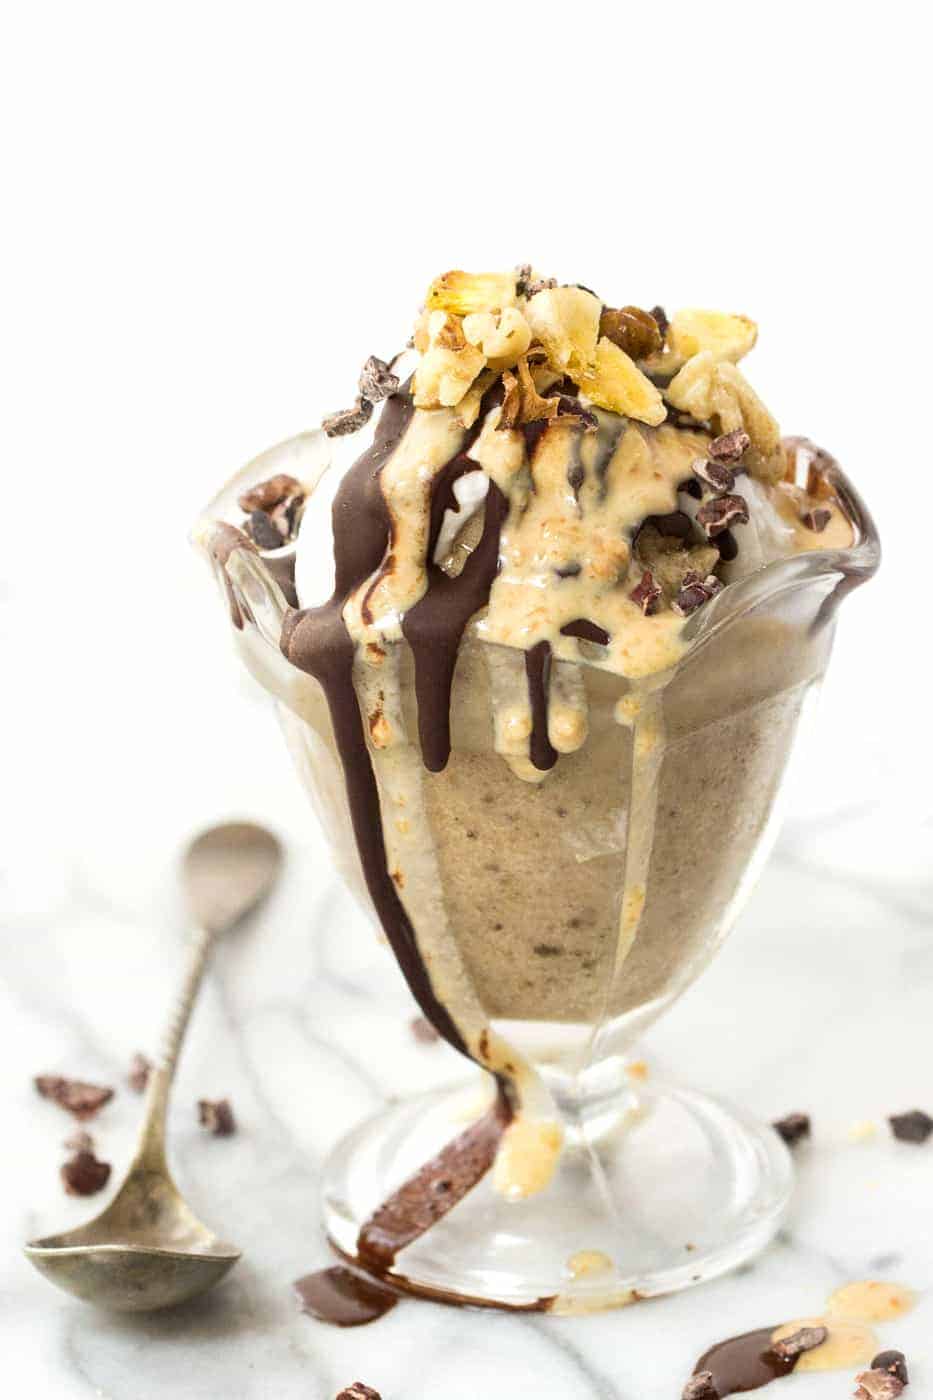 Clean Eating Banana Ice Cream Sundae -- a decadent treat or healthy indulgence? BOTH! made without any refined sugar or dairy, this is a dessert you can enjoy and feel great about eating!